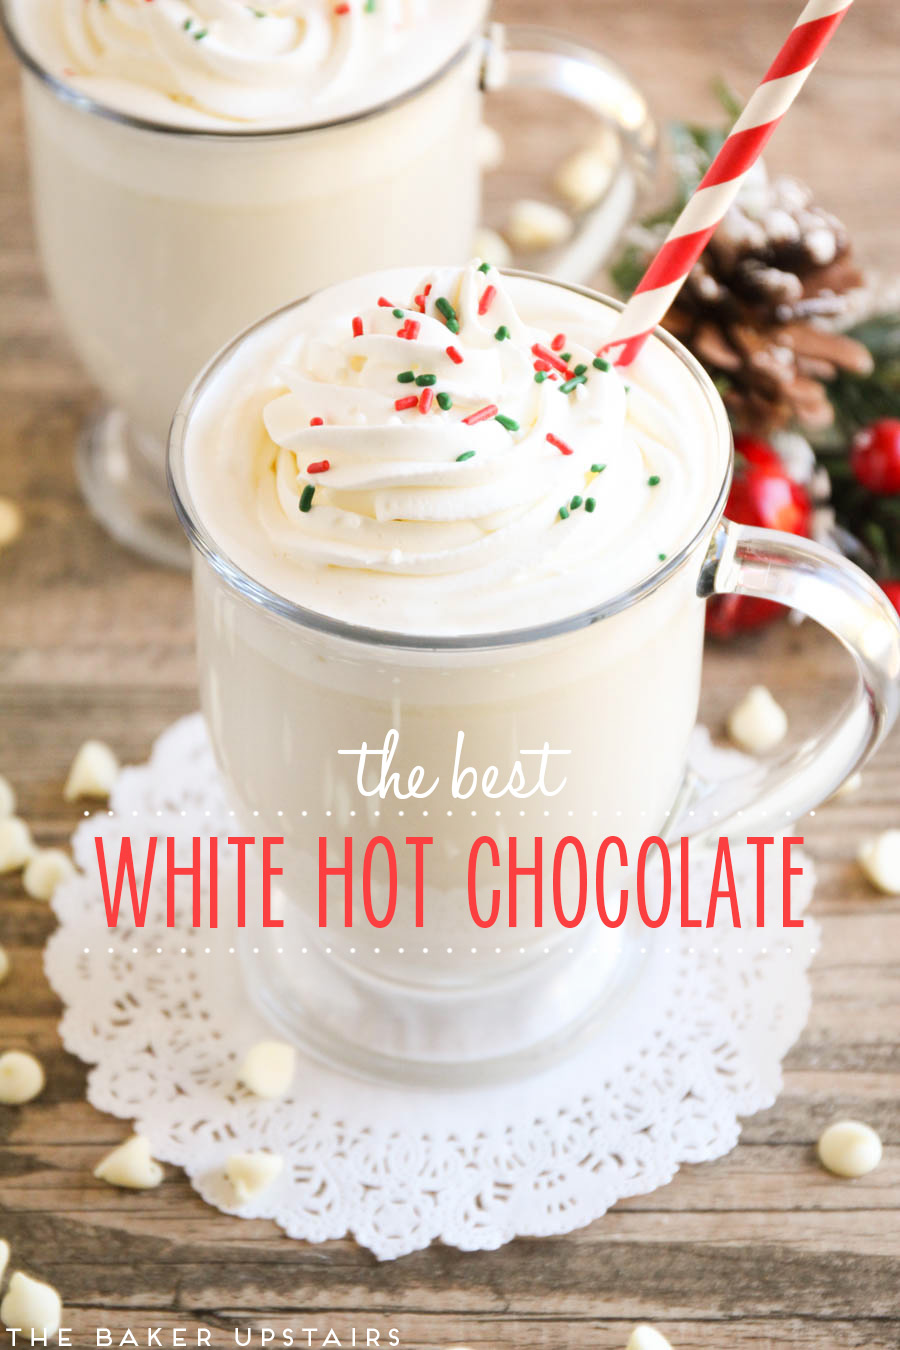 This homemade white hot chocolate is velvety smooth and so rich and delicious!